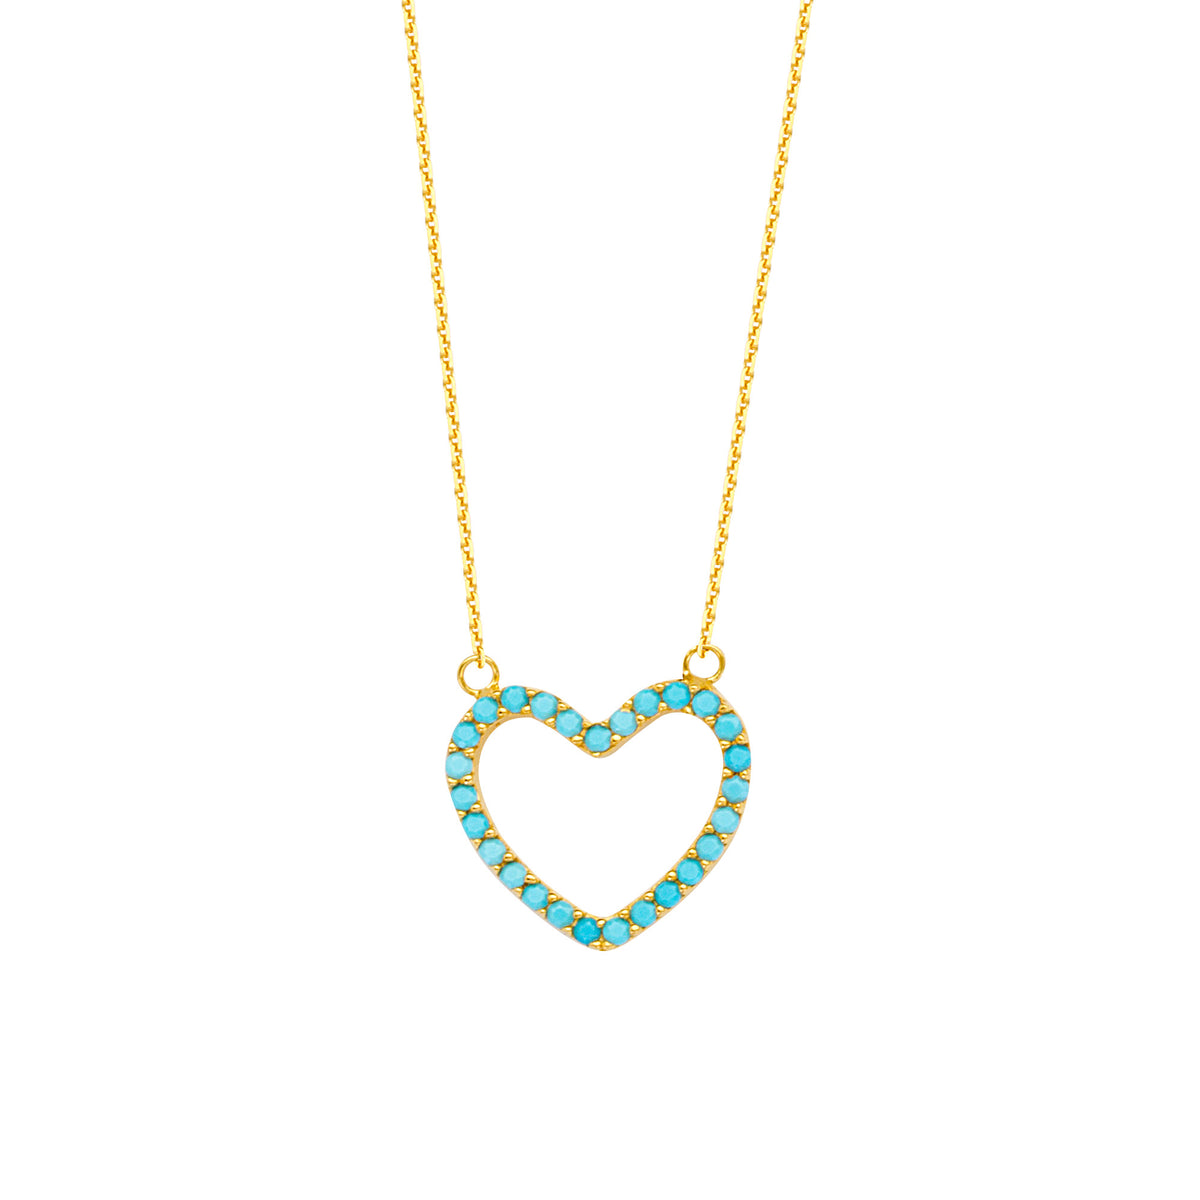 14K Yellow Gold Heart Pendant Necklace, 16" To 18" Adjustable